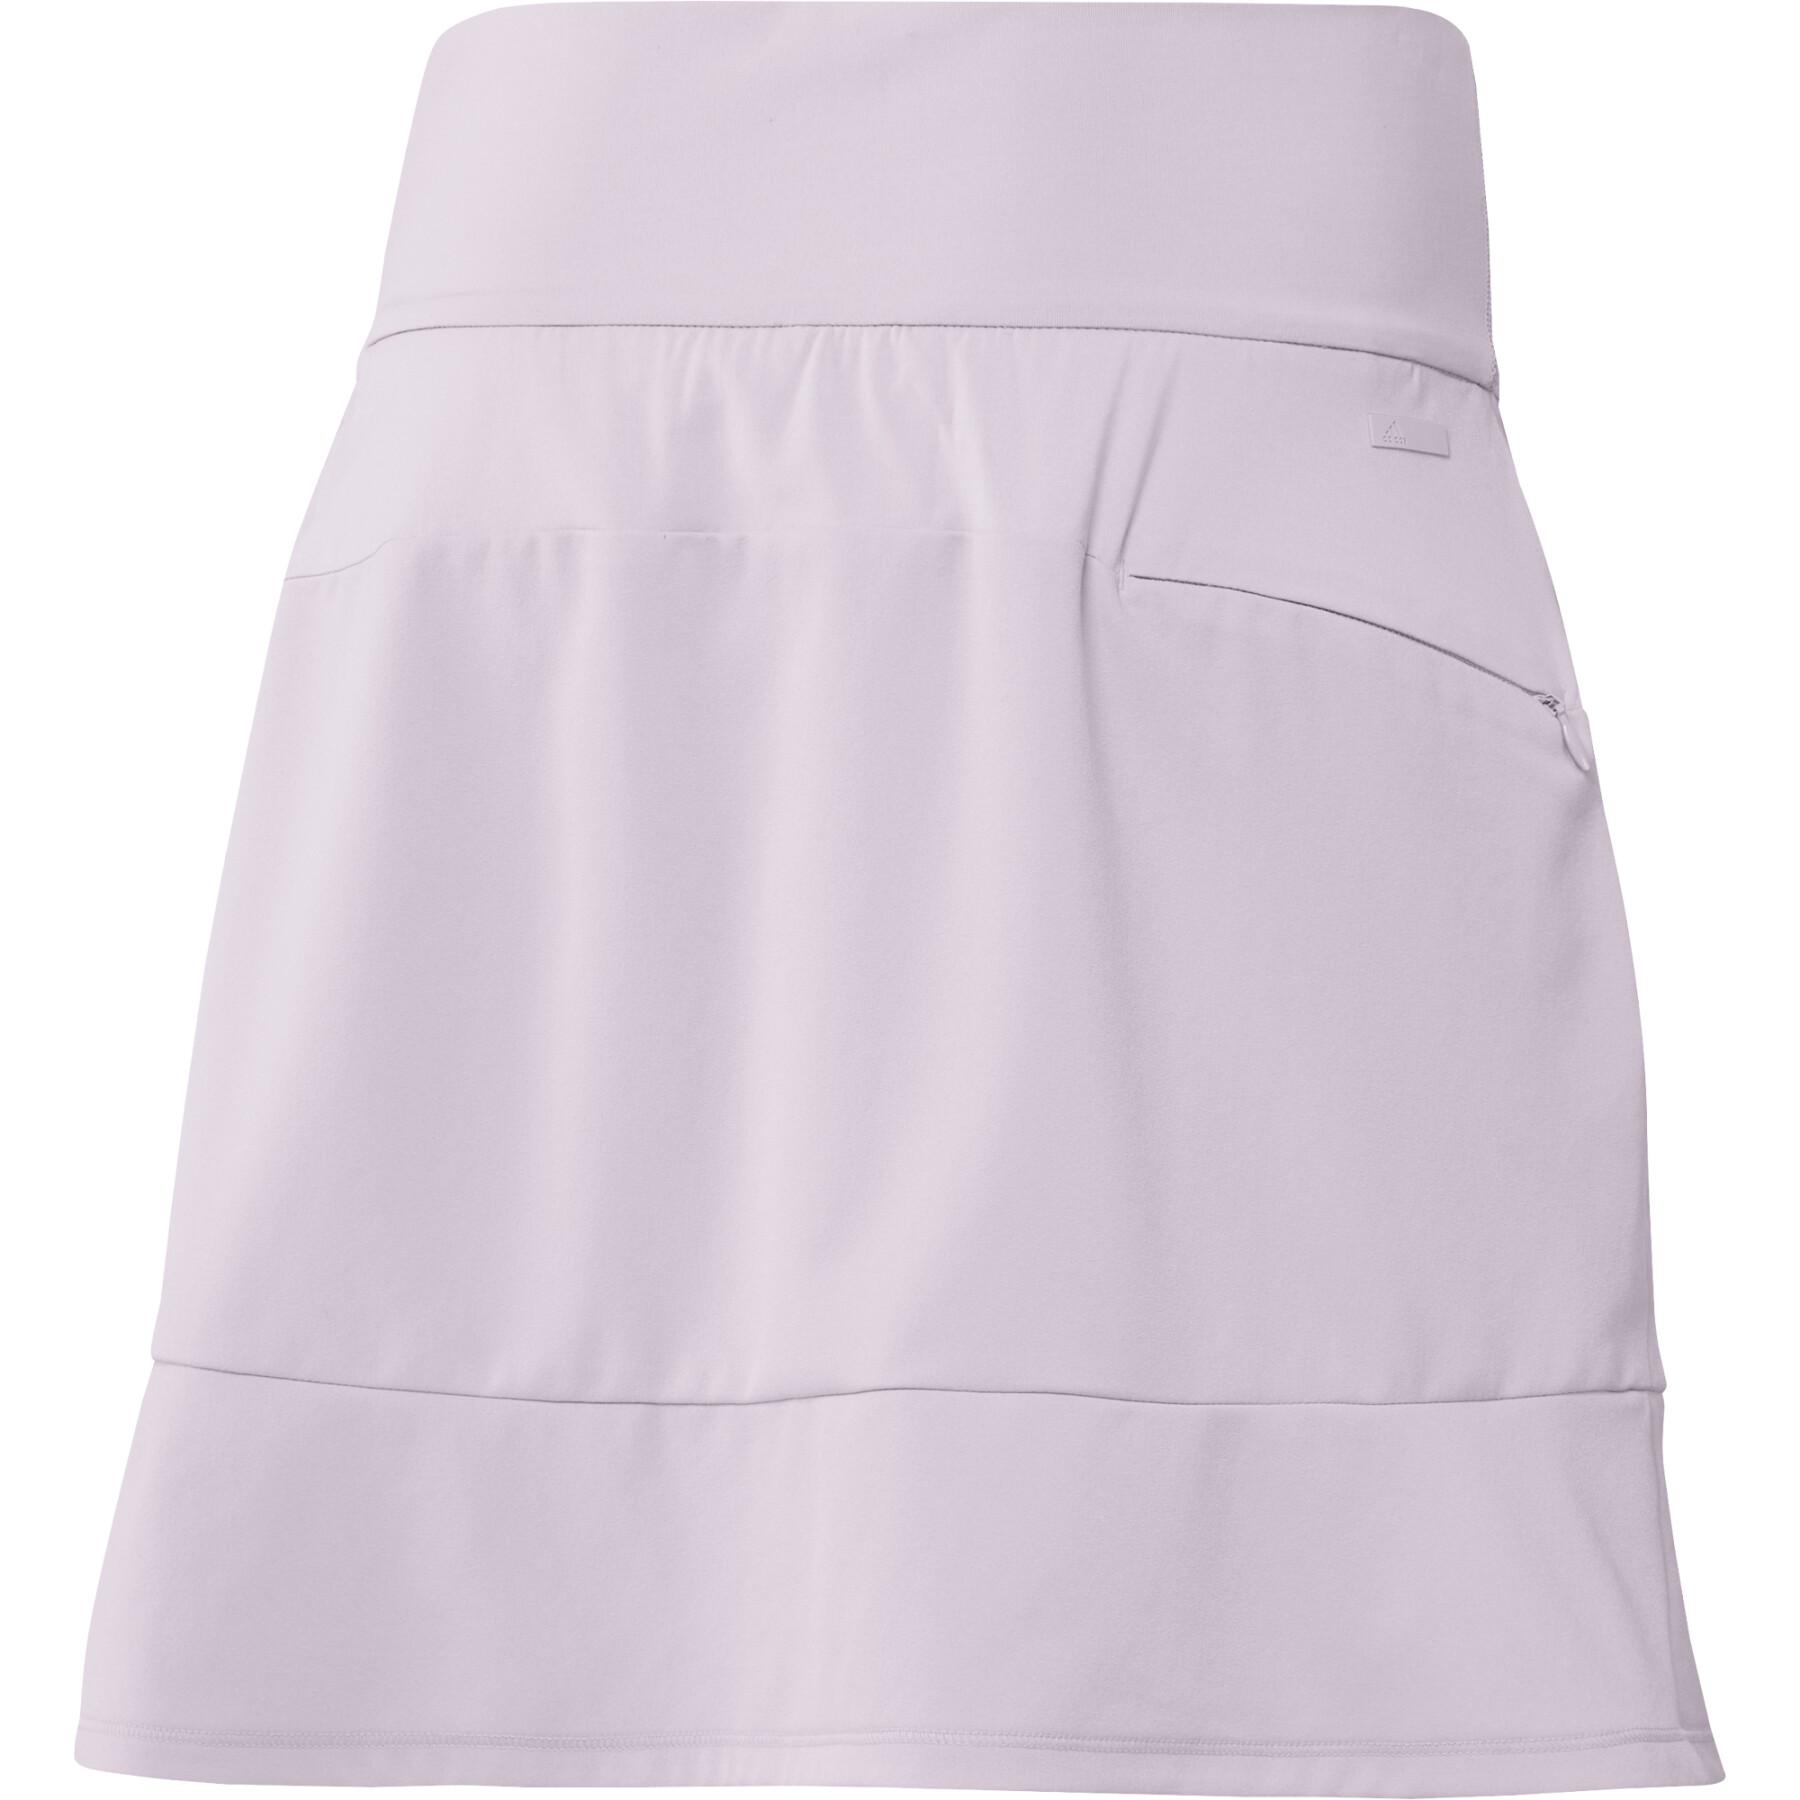 Jupe femme adidas Frill (Grandes tailles)